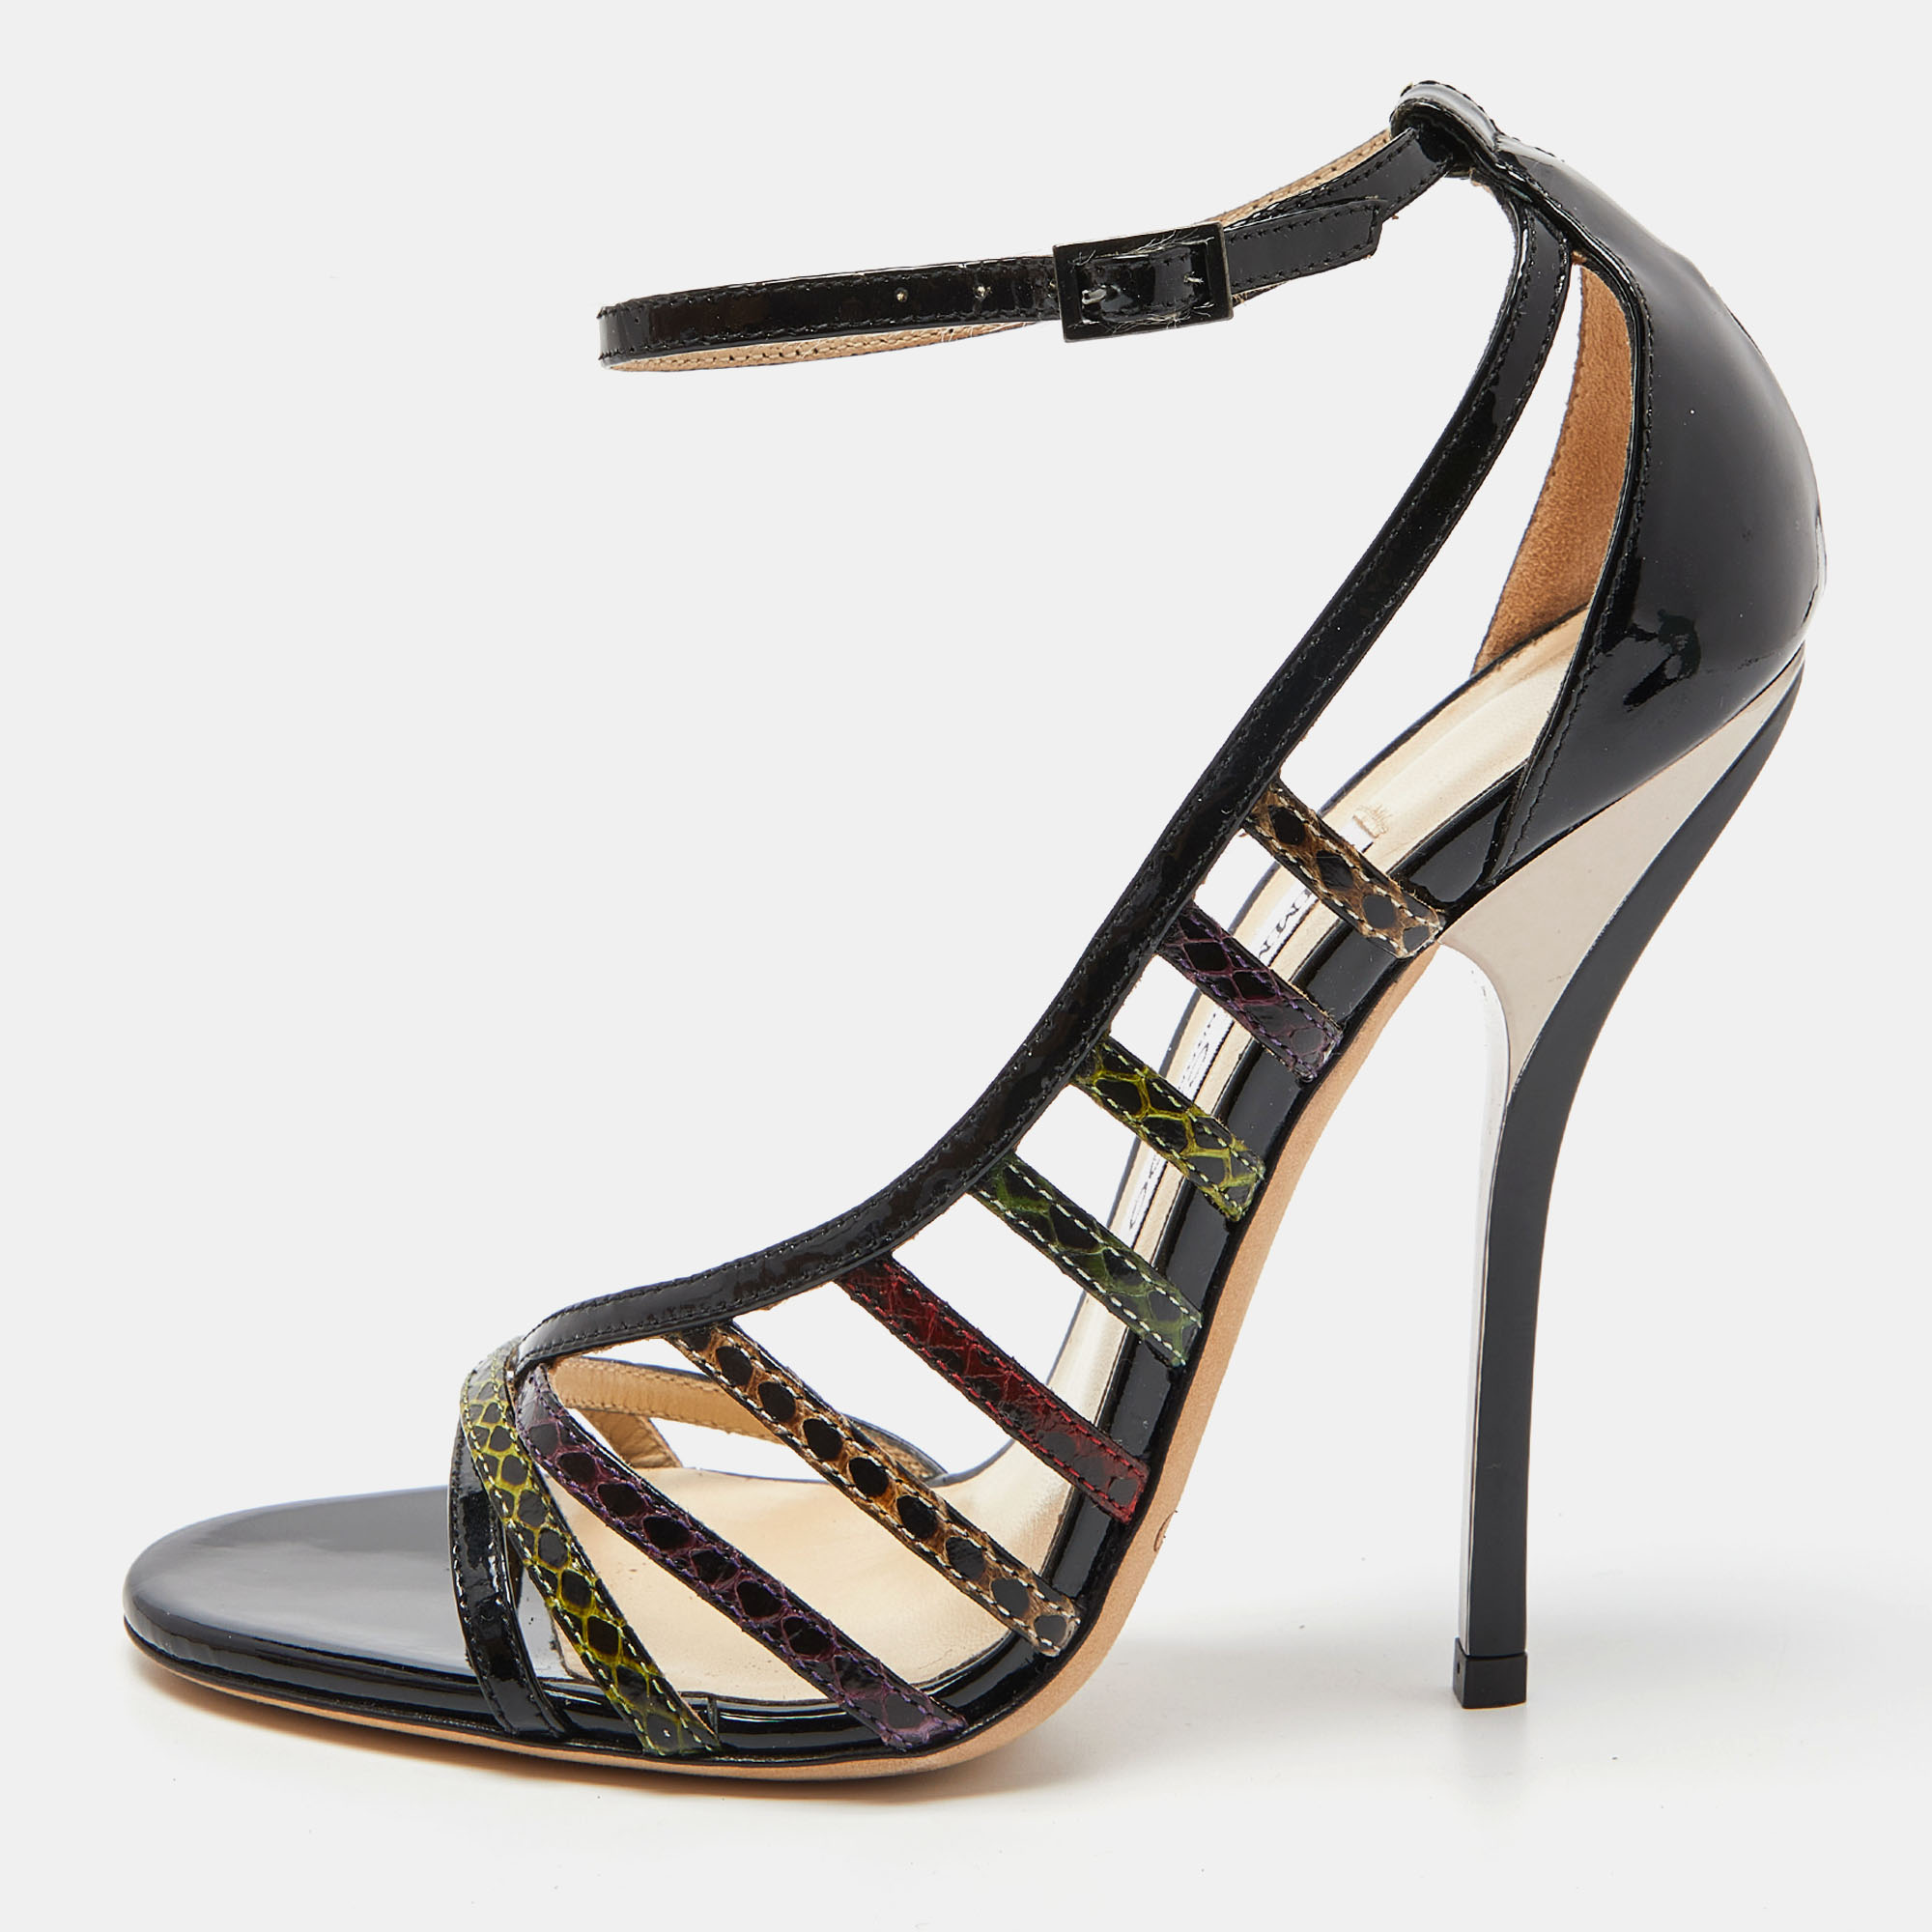 Jimmy Choo Multicolor Snakeskin And Patent Leather Strappy Sandals Size 37